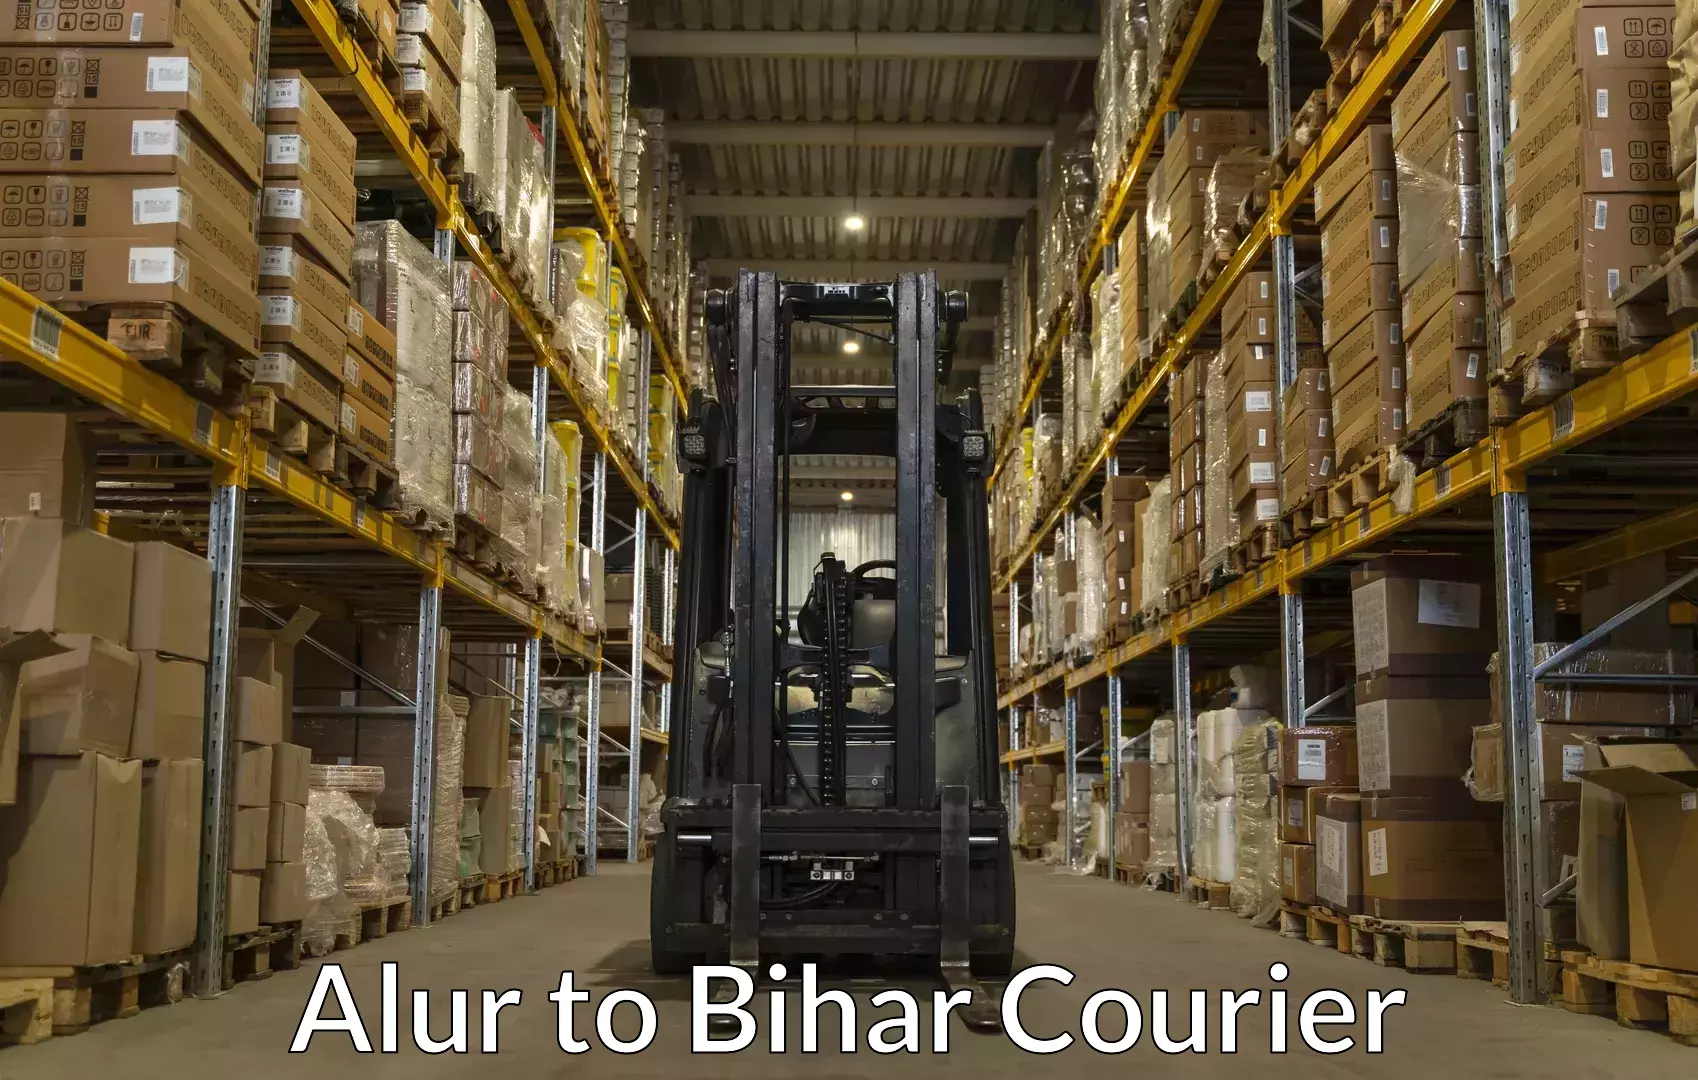 Furniture delivery service Alur to Bhojpur